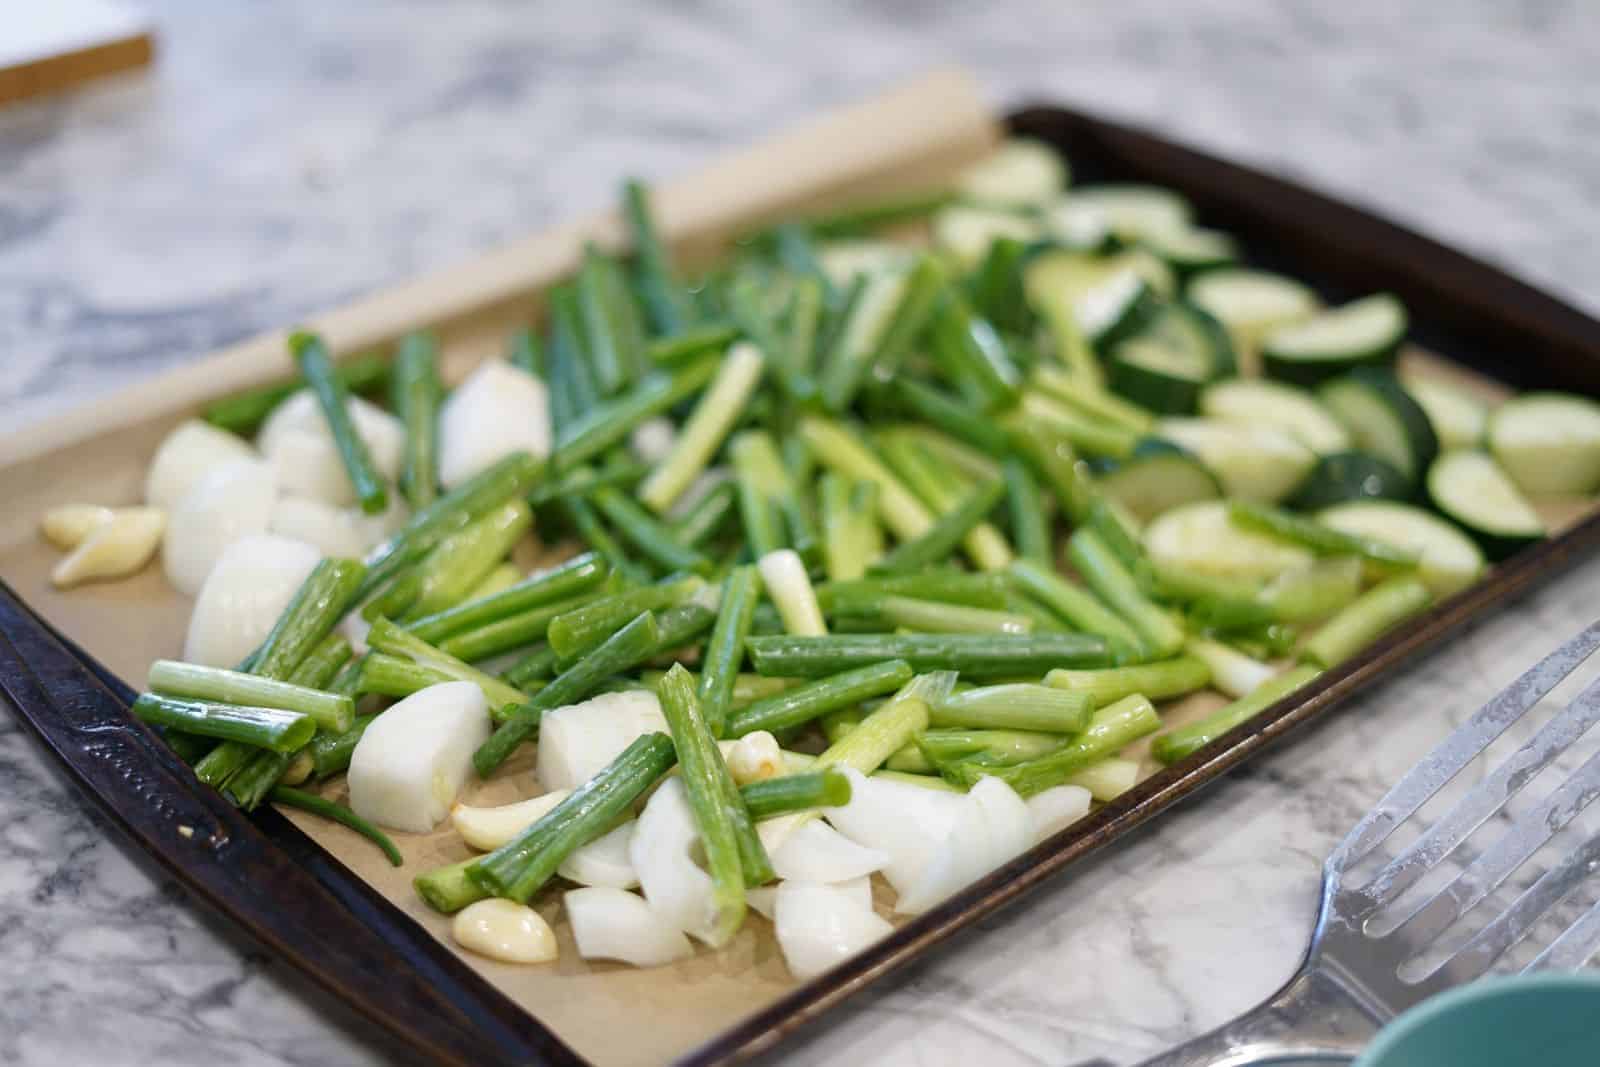 garlic, green onion, white onion, and cucumber on a baking sheet with parchment paper